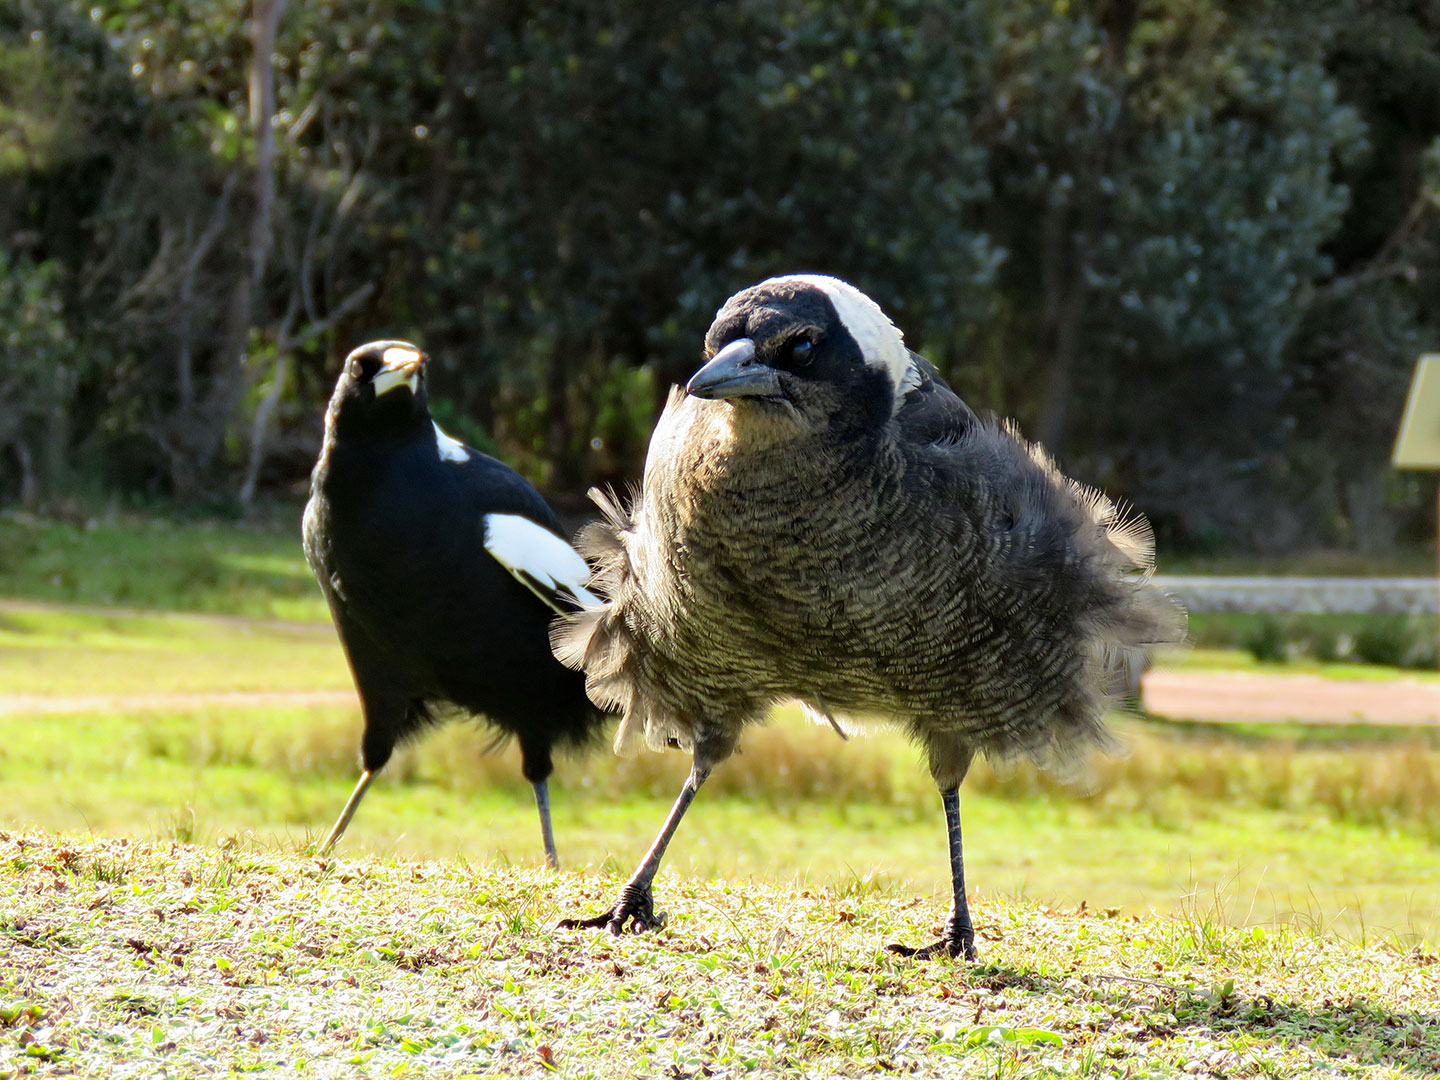 Fluffy magpie fledgling standing in front of adult magpie